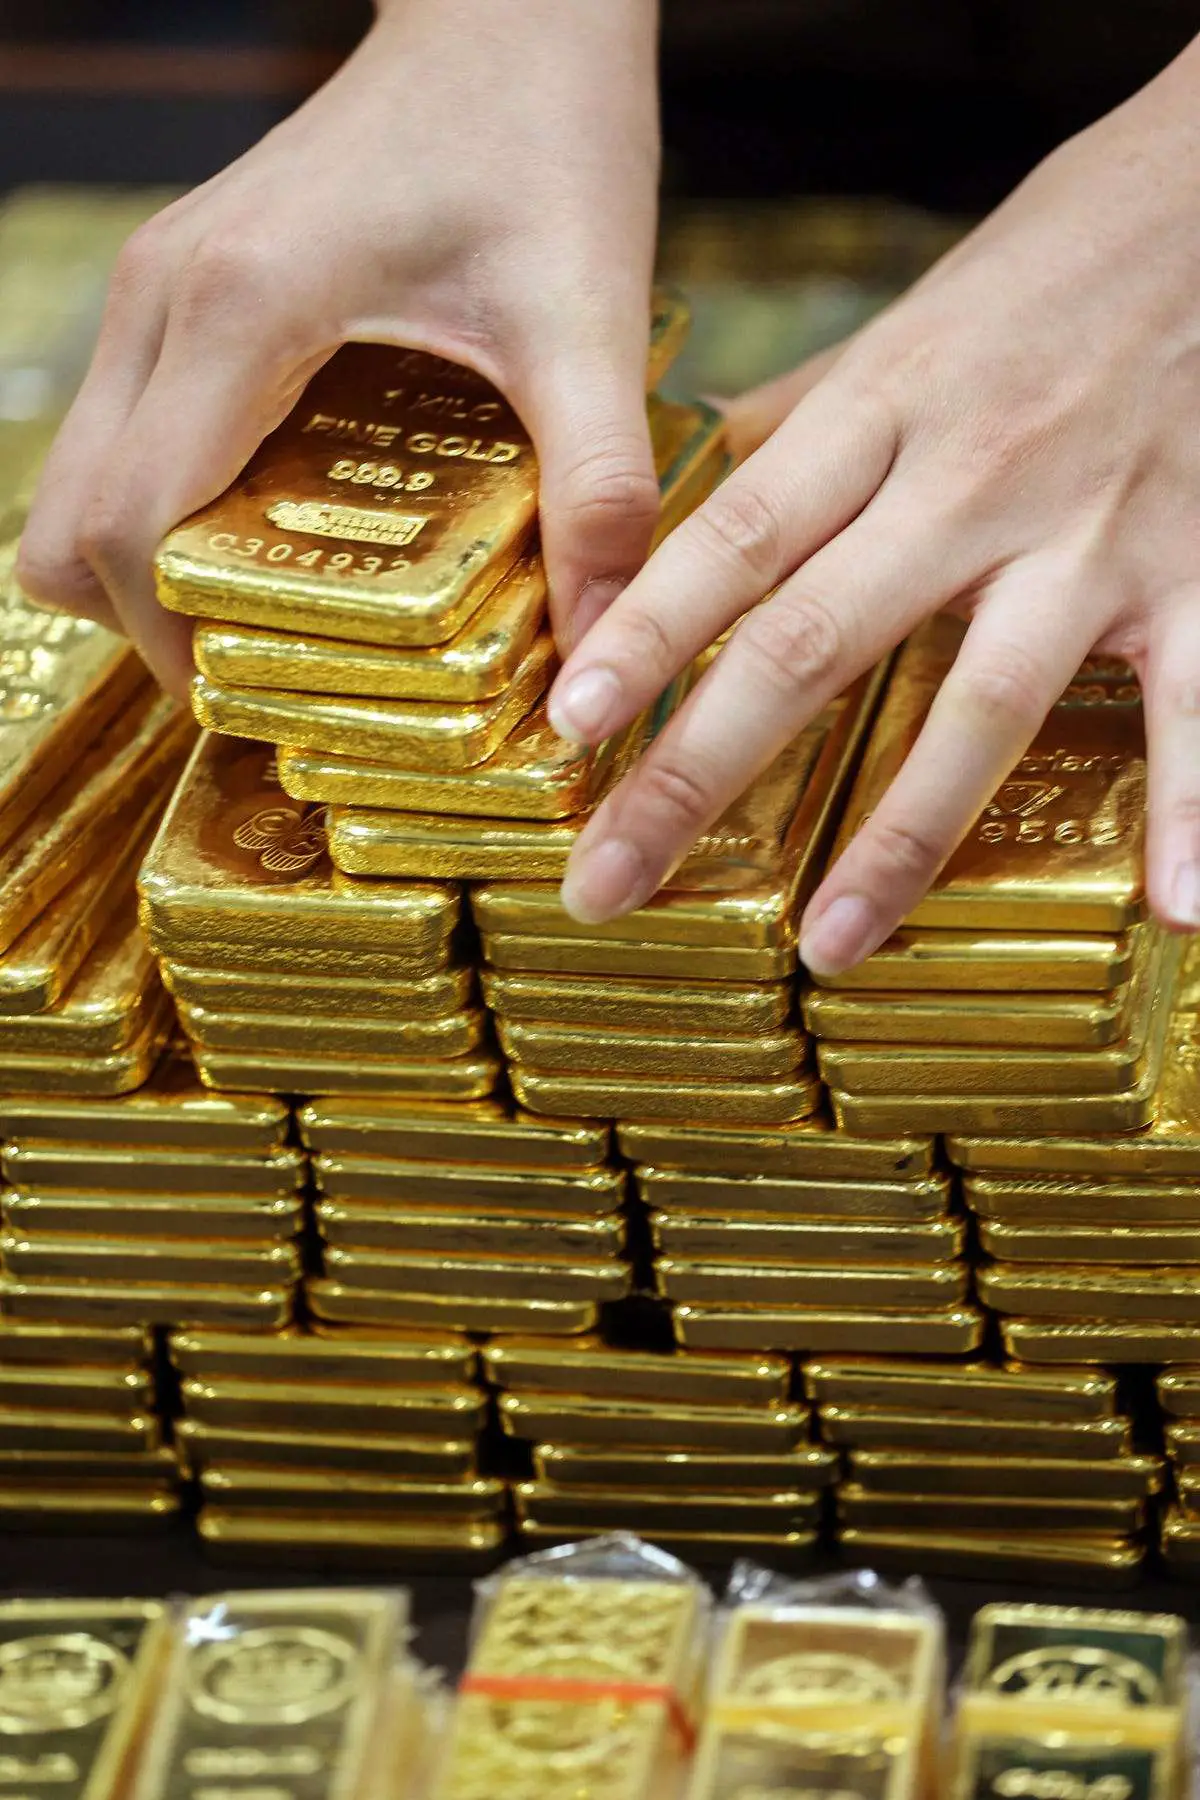 Gold Price Of Almost $3,000/Oz Needed To Claim The Record